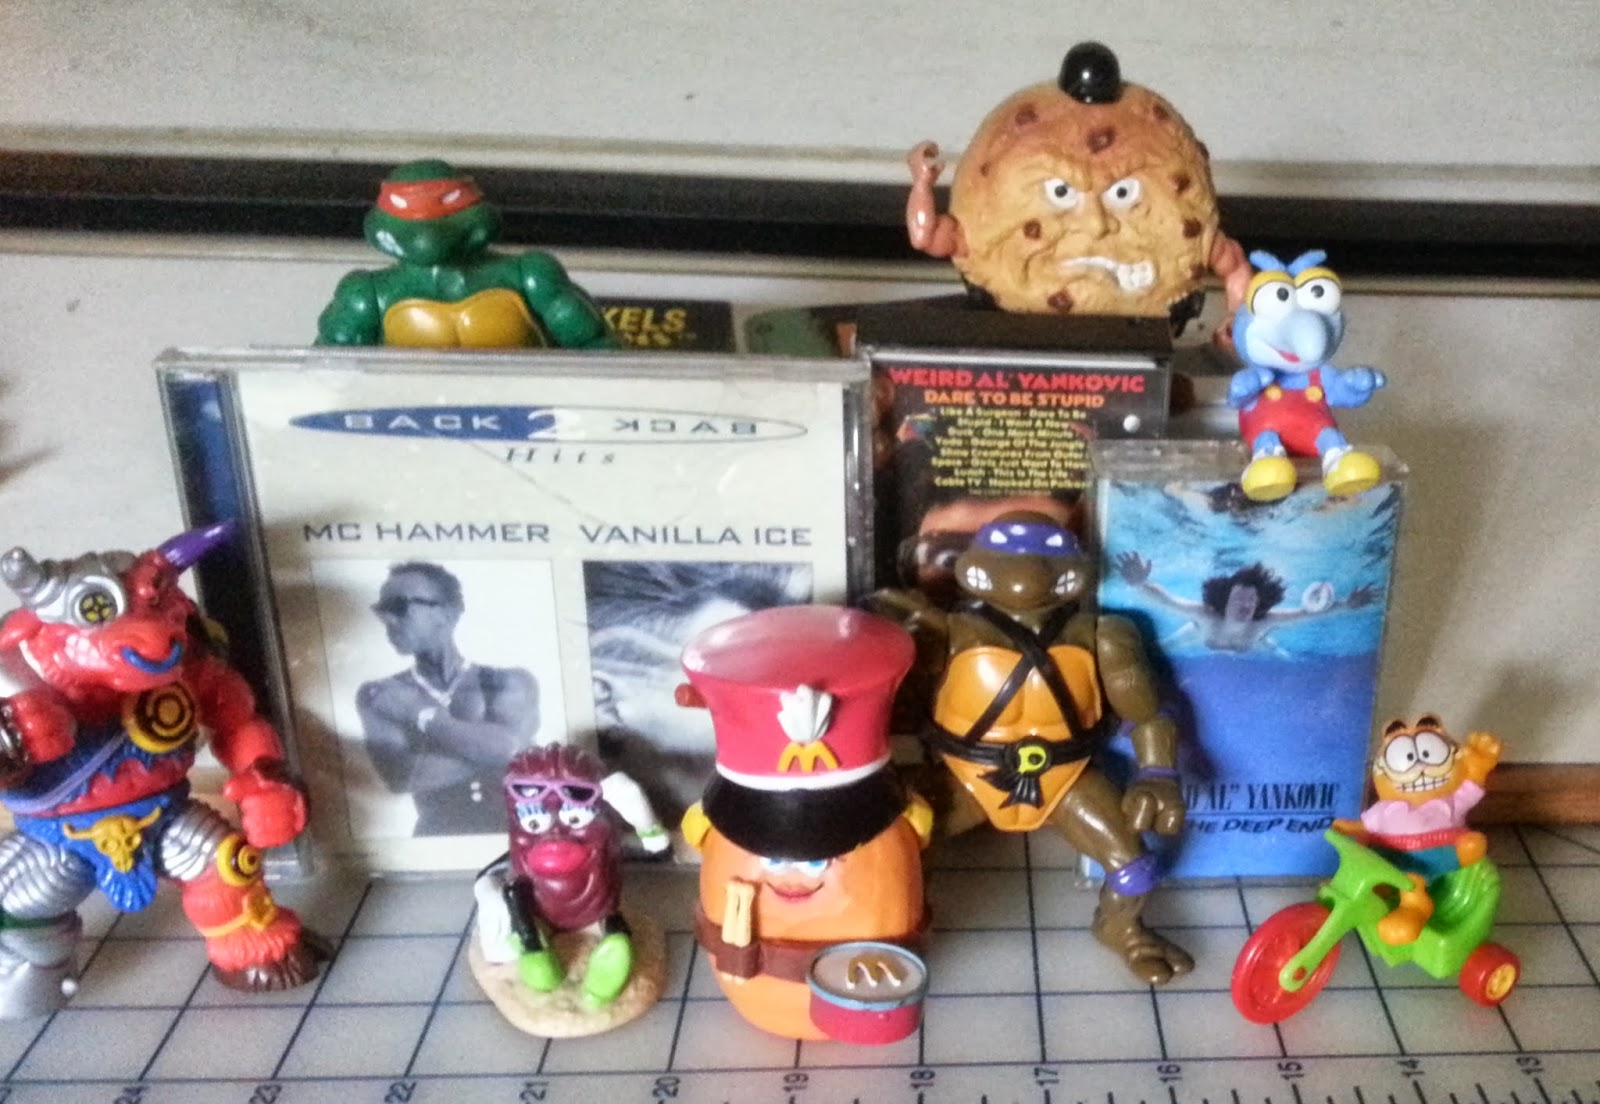 The random things we collected as kids. I still have the Ninja Turtle Figurines!